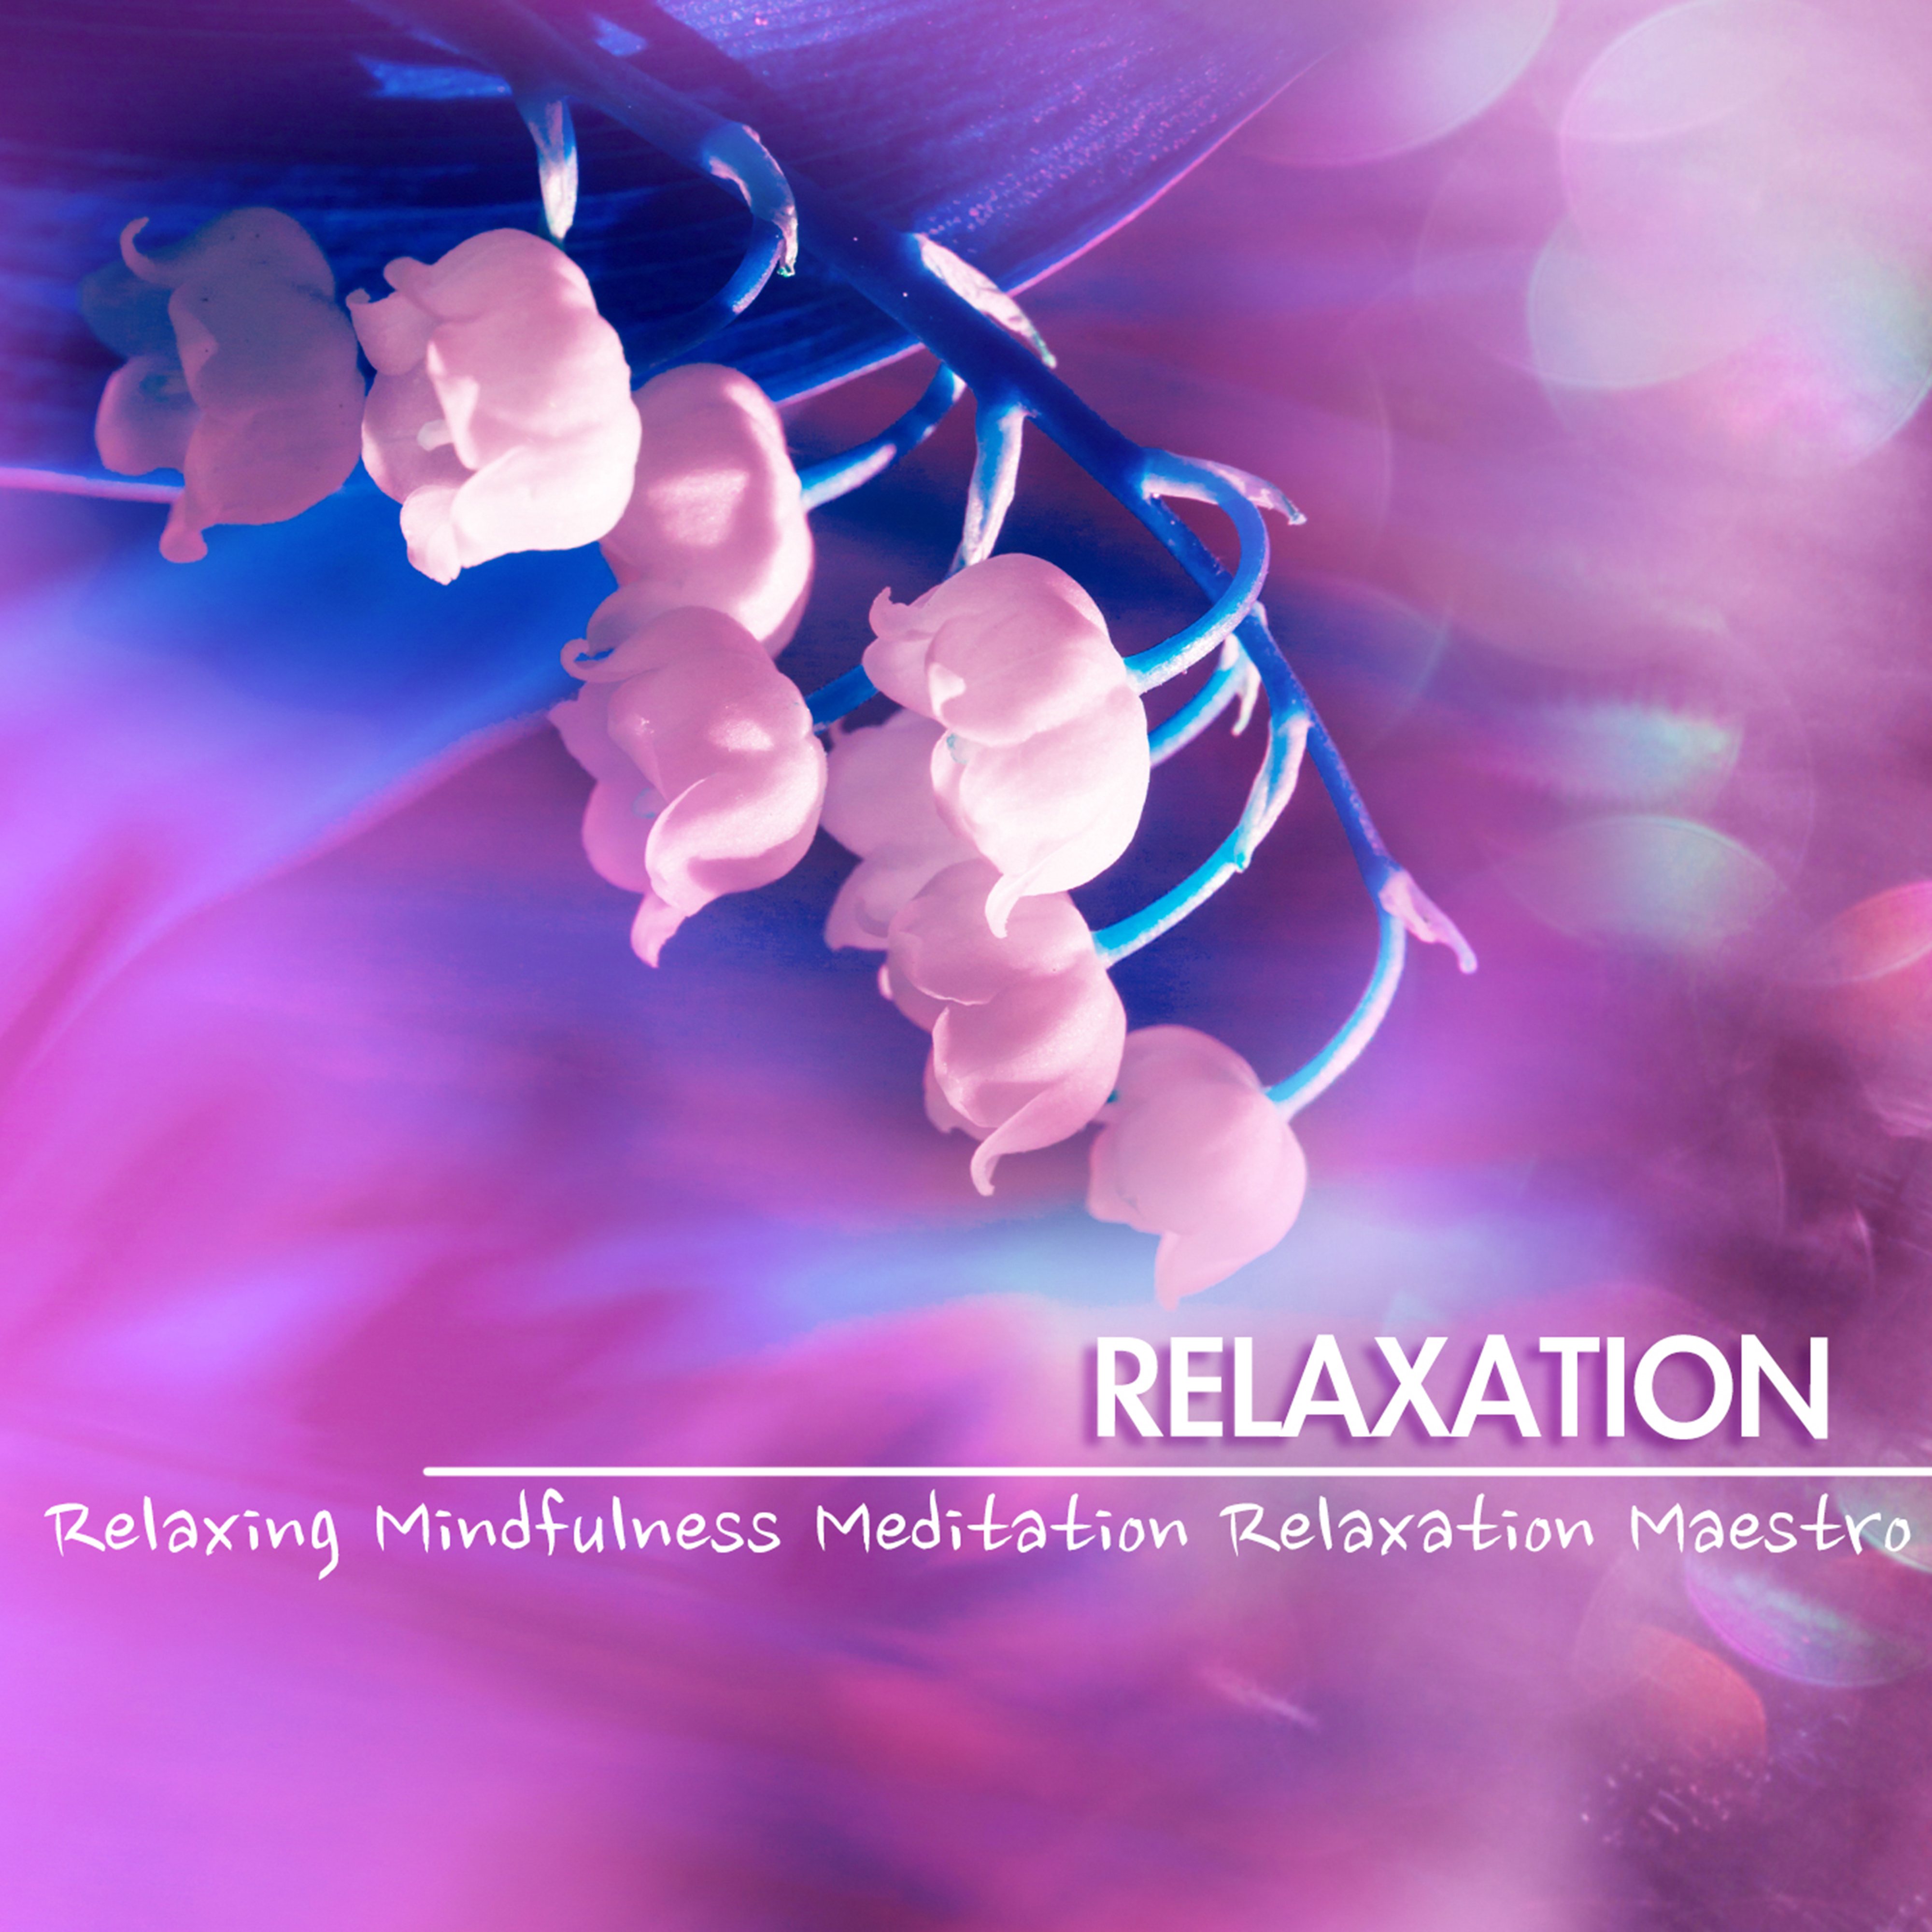 Relaxation Ambient